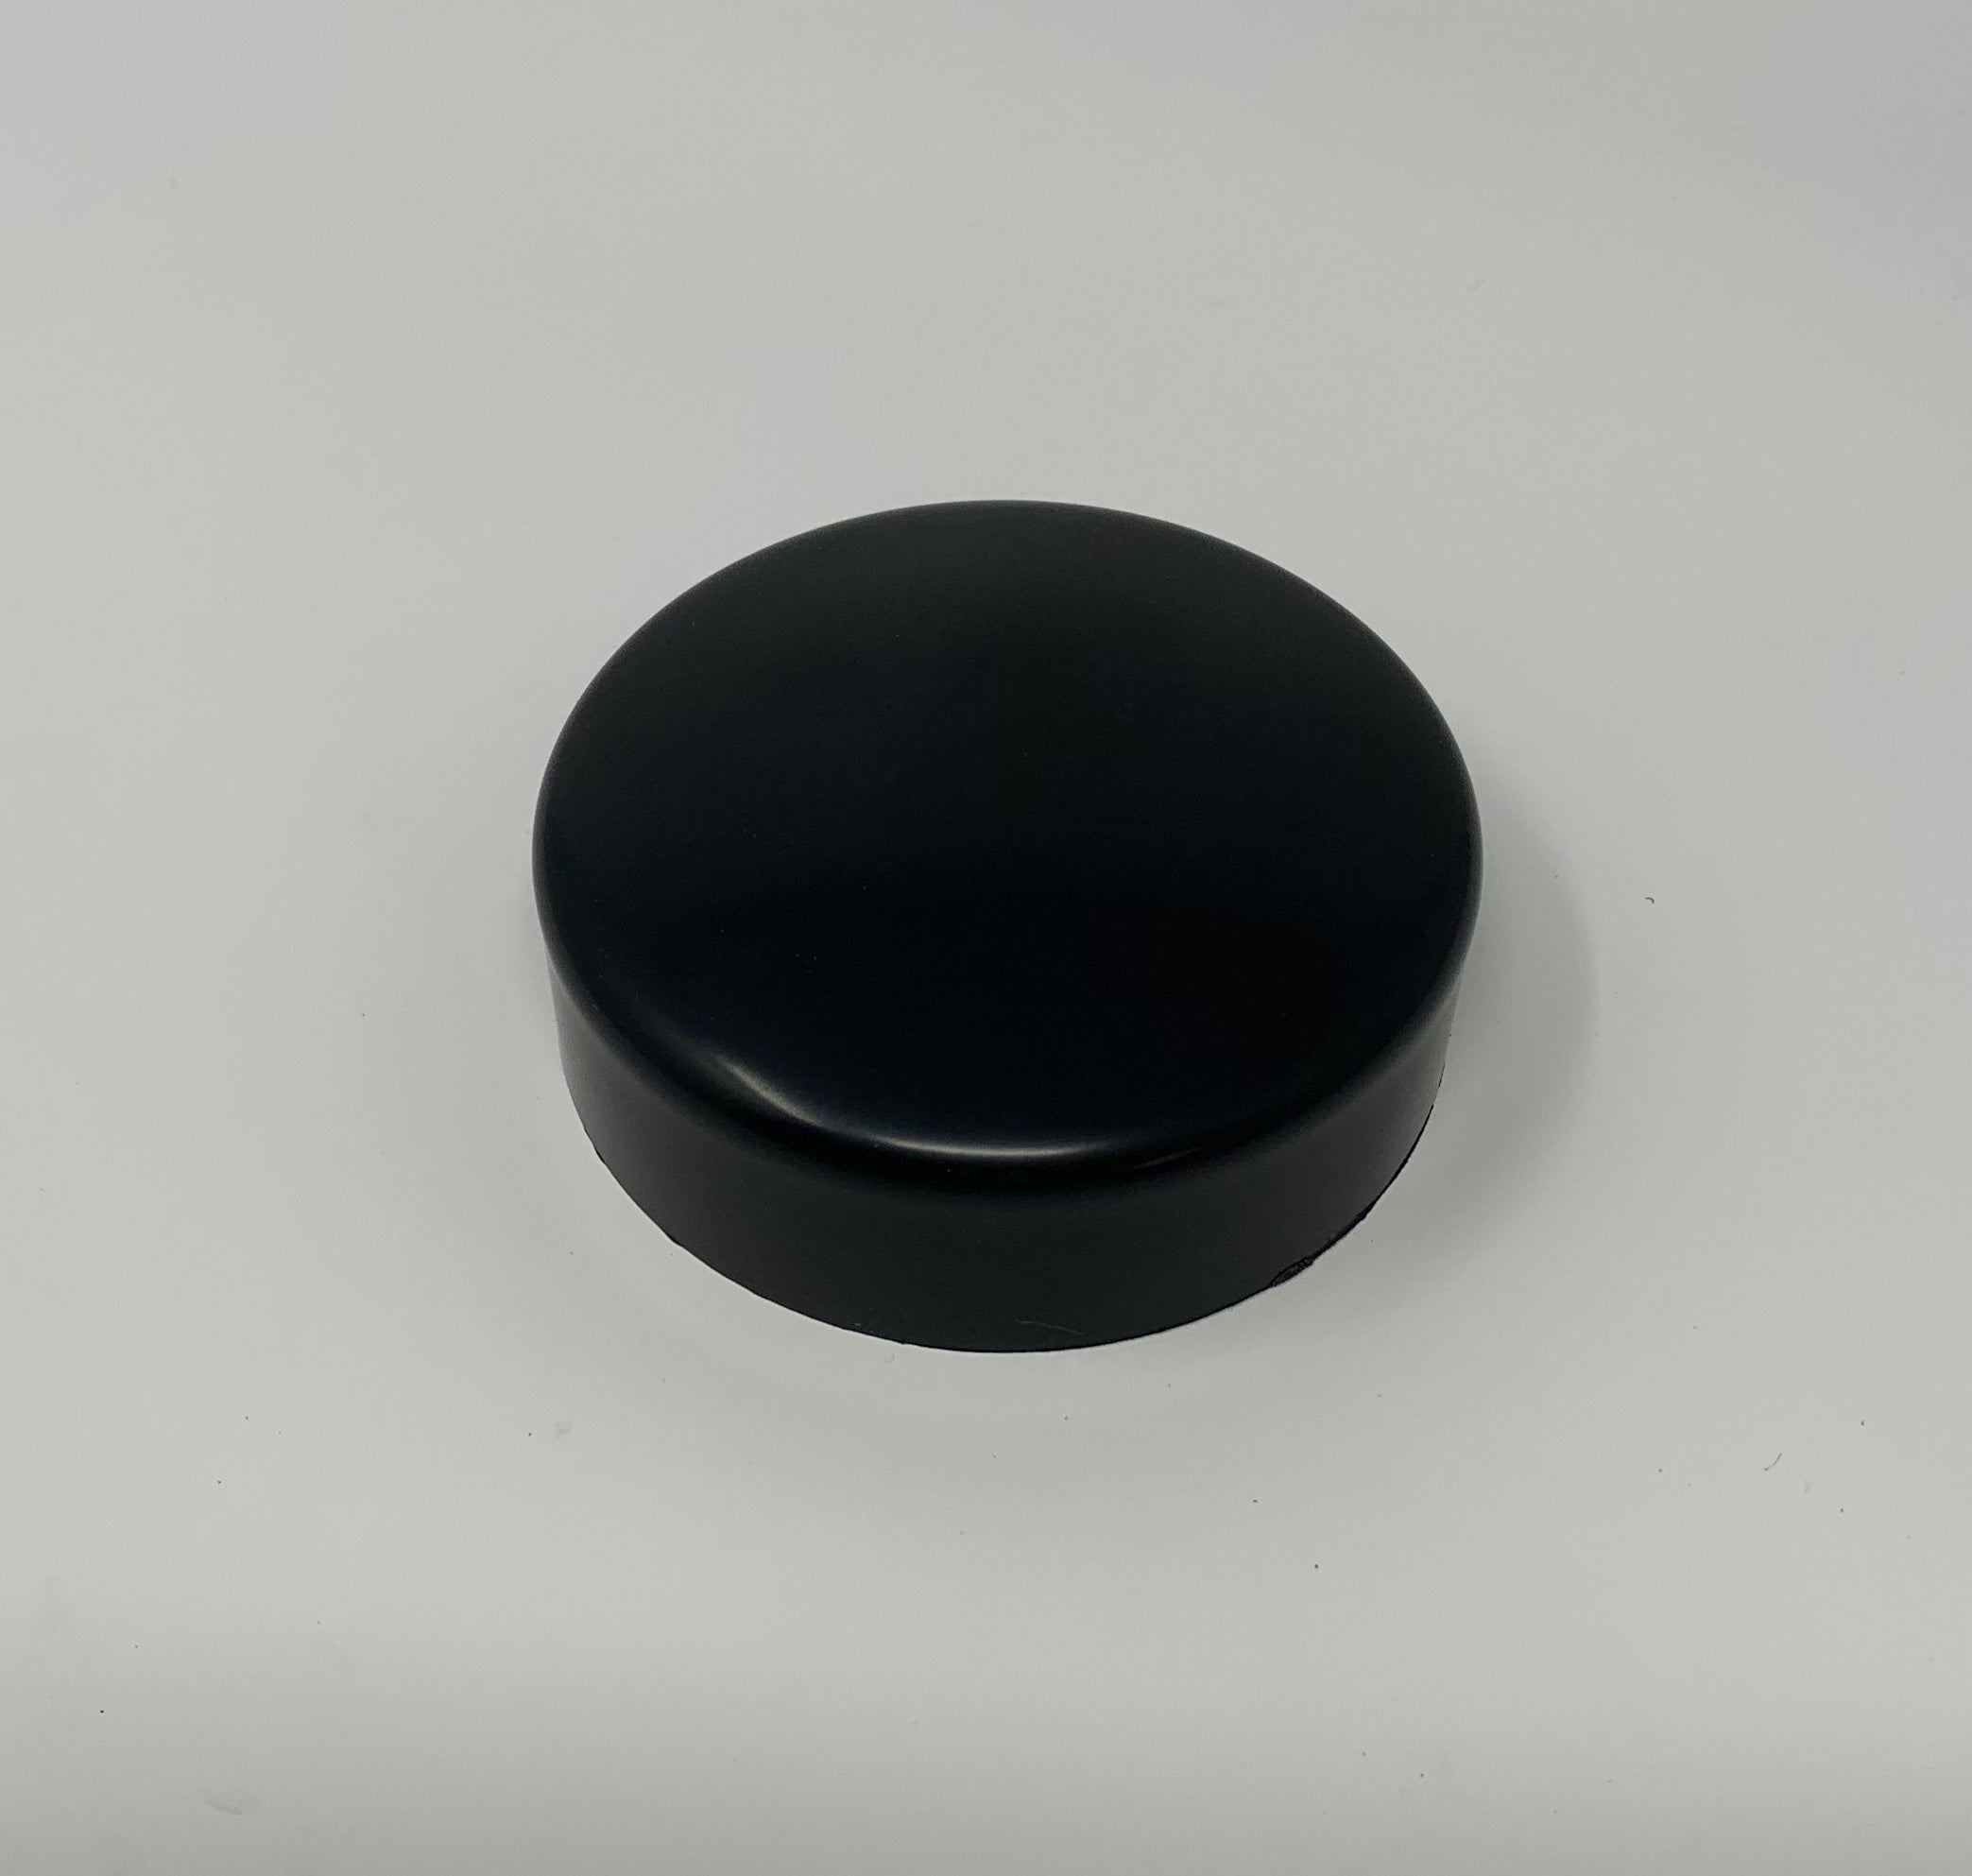 Proform Power Steering Cap Cover - Mk6 Ford Fiesta (Plastic Finishes)